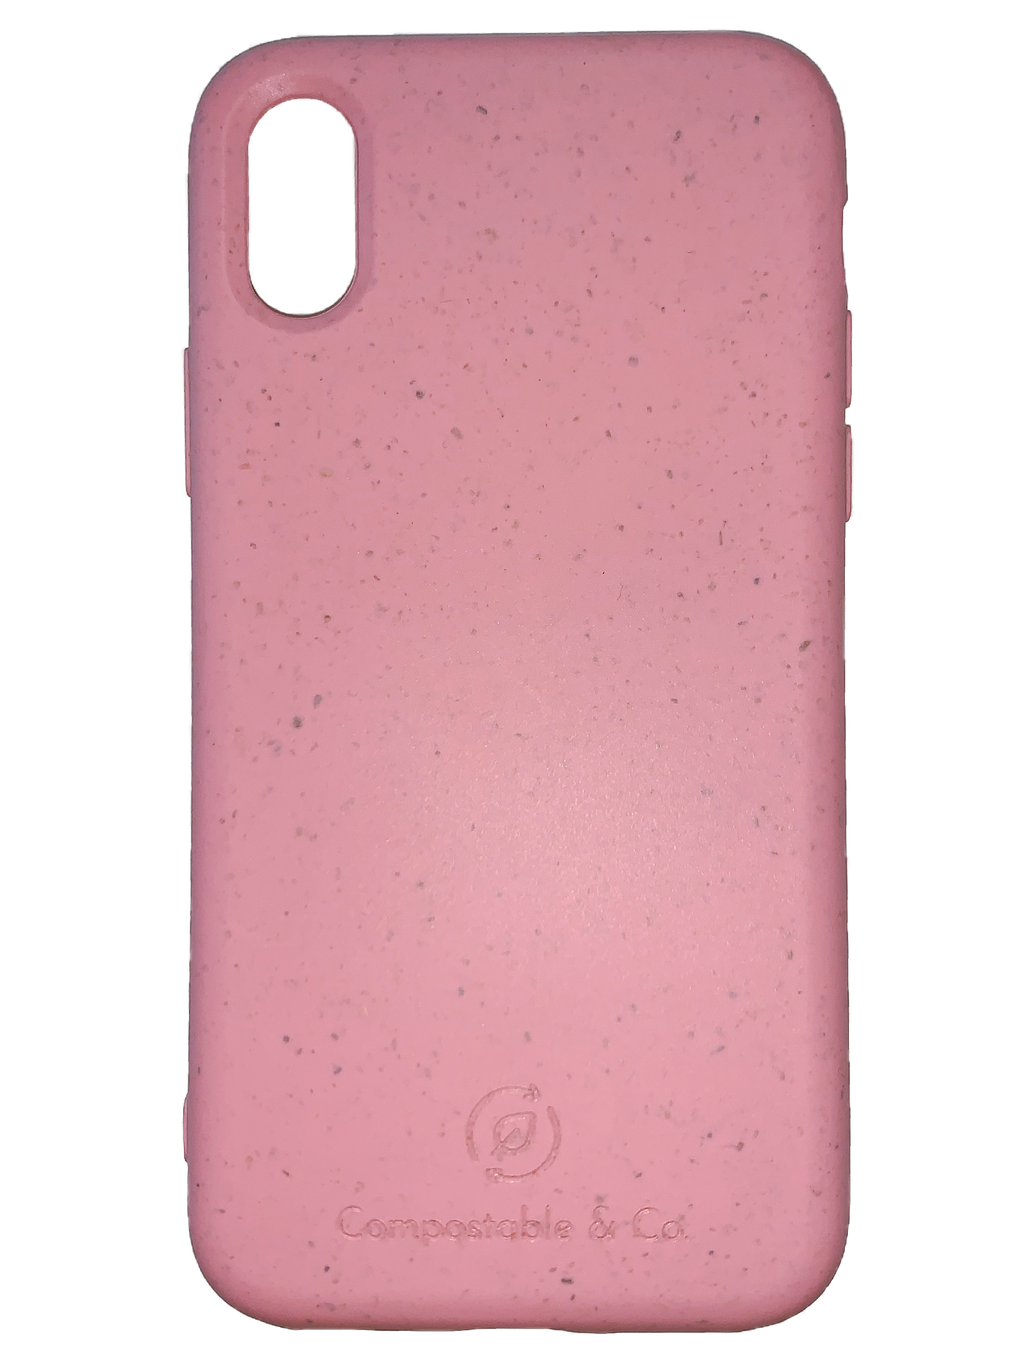 Compostable & Co. iPhone xr pink biodegradable phone case